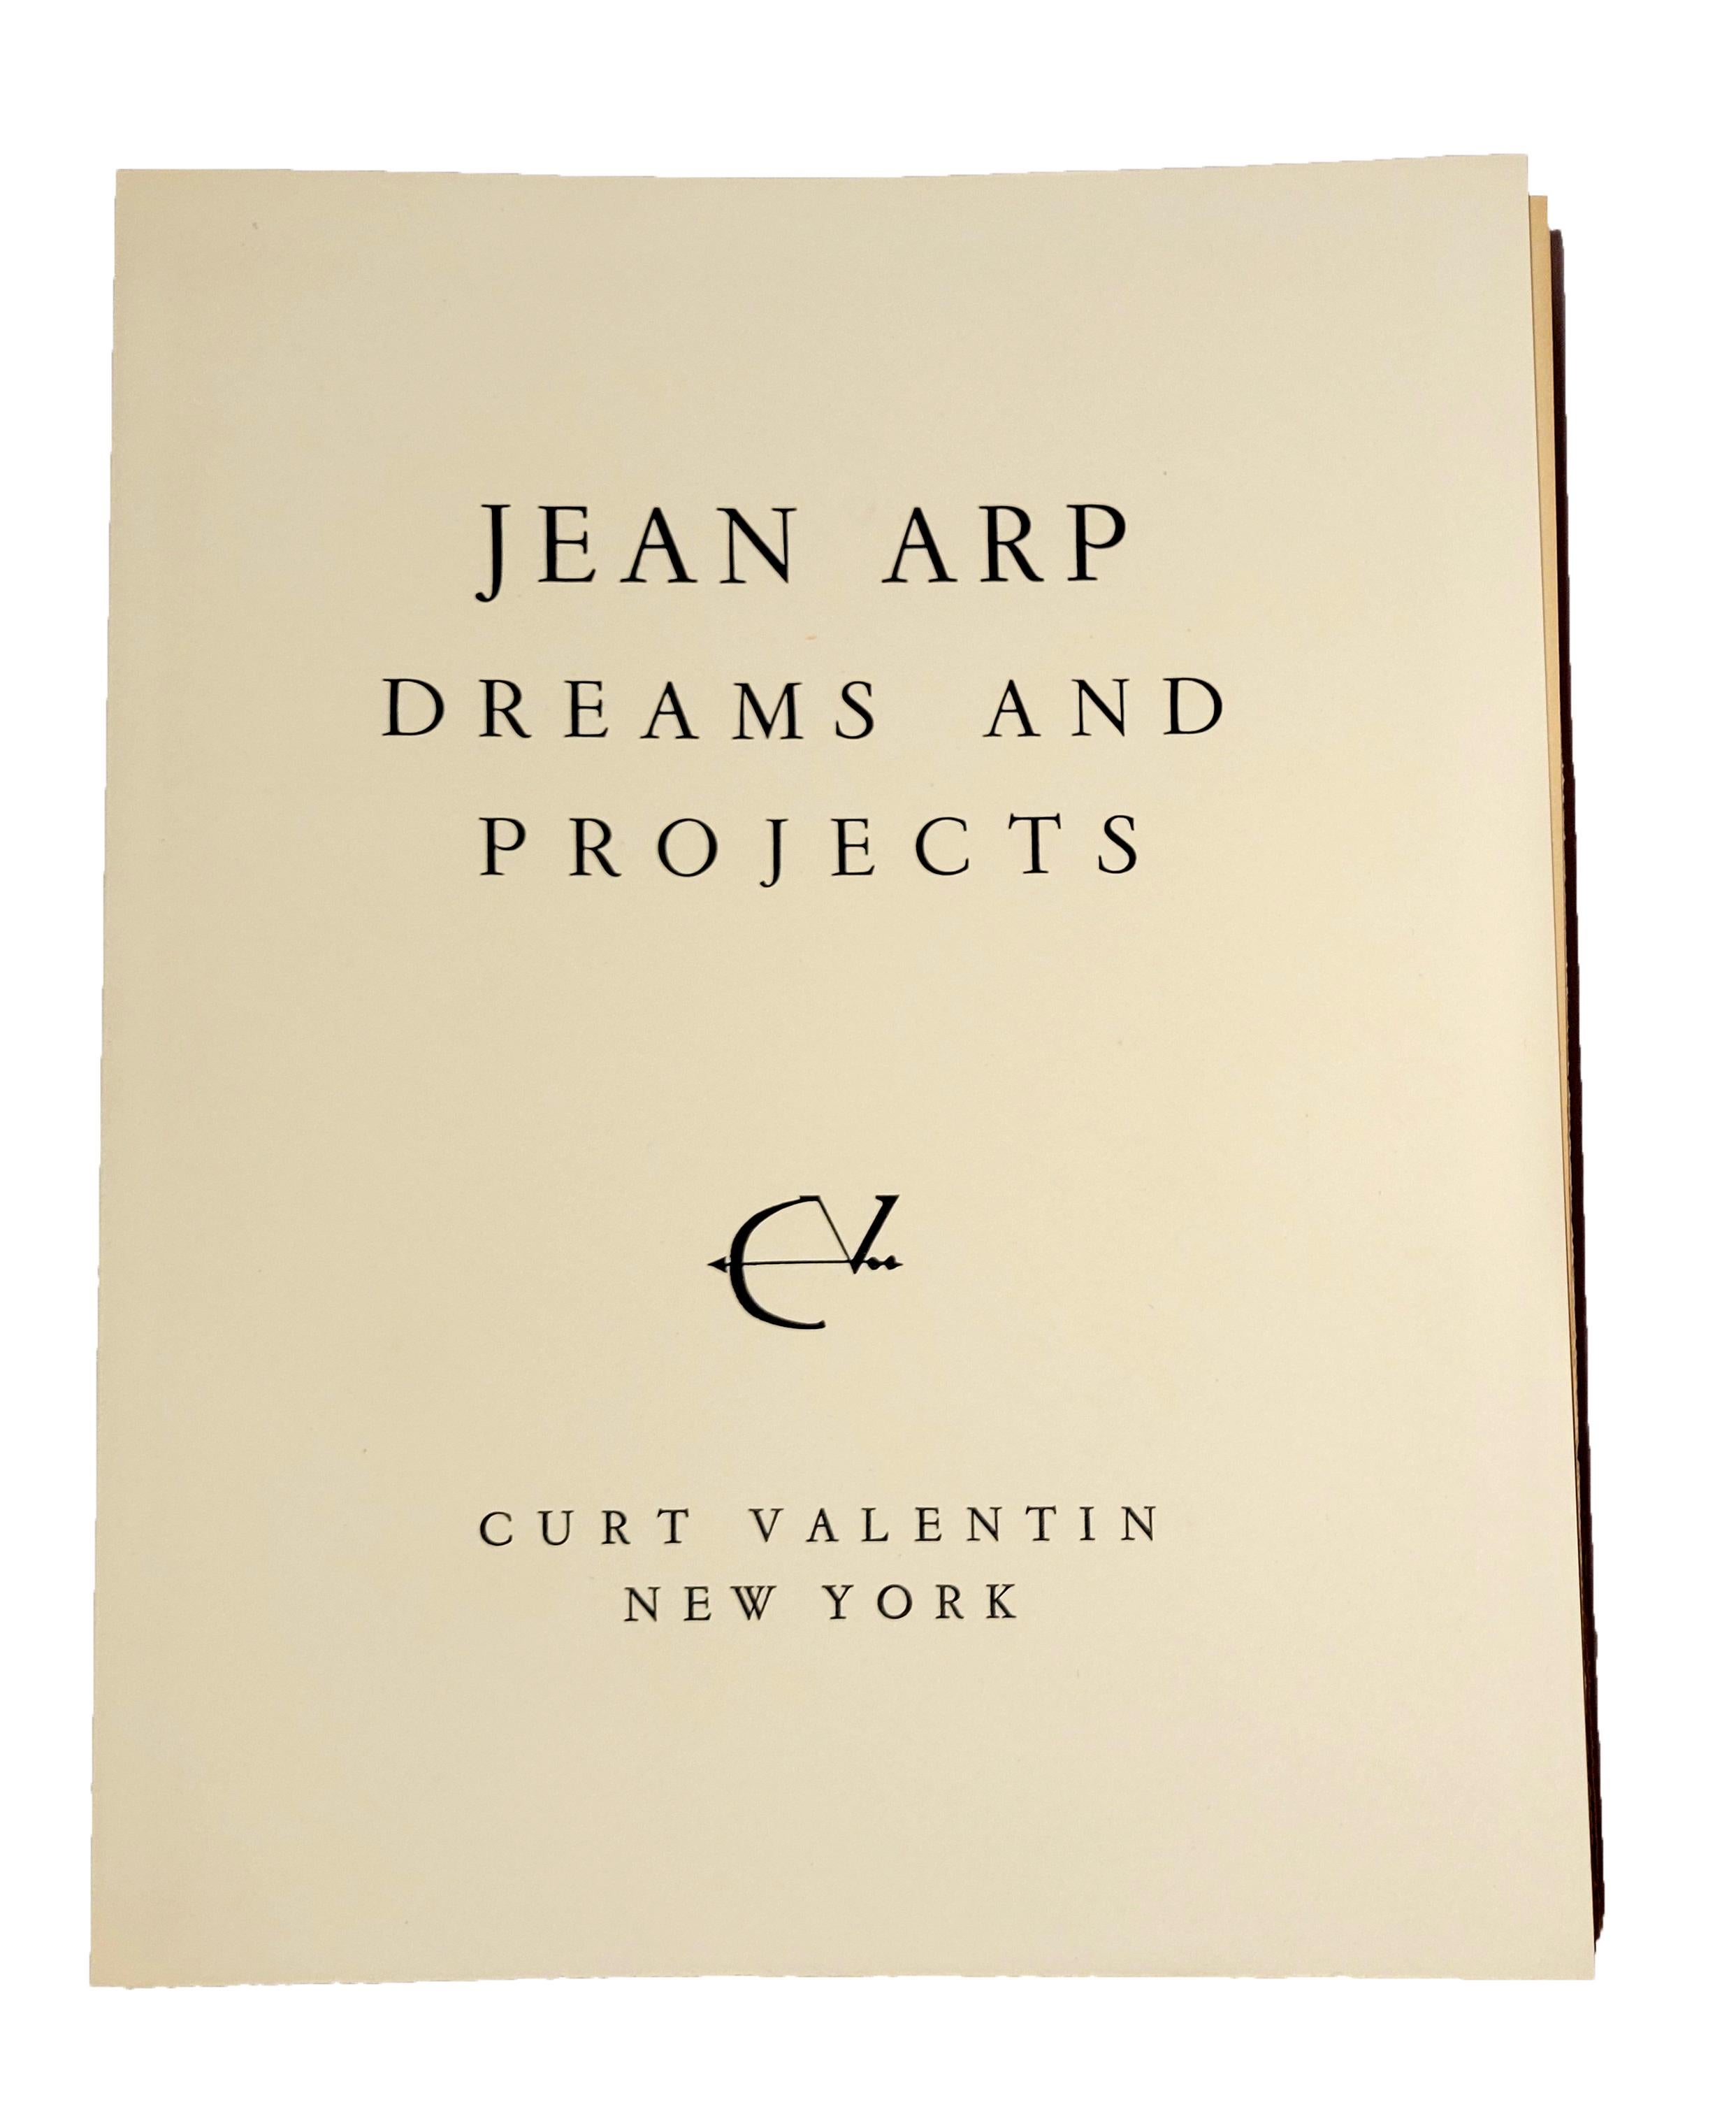 ARP, Jean.  Dreams and Projects. Illustrated with 28 woodcuts by Jean Arp of which 21 are printed in black and 7 in gray and black. Small folio, bound loose in the original wrappers and publisher's cardboard slipcase. New York: Curt Valentin,